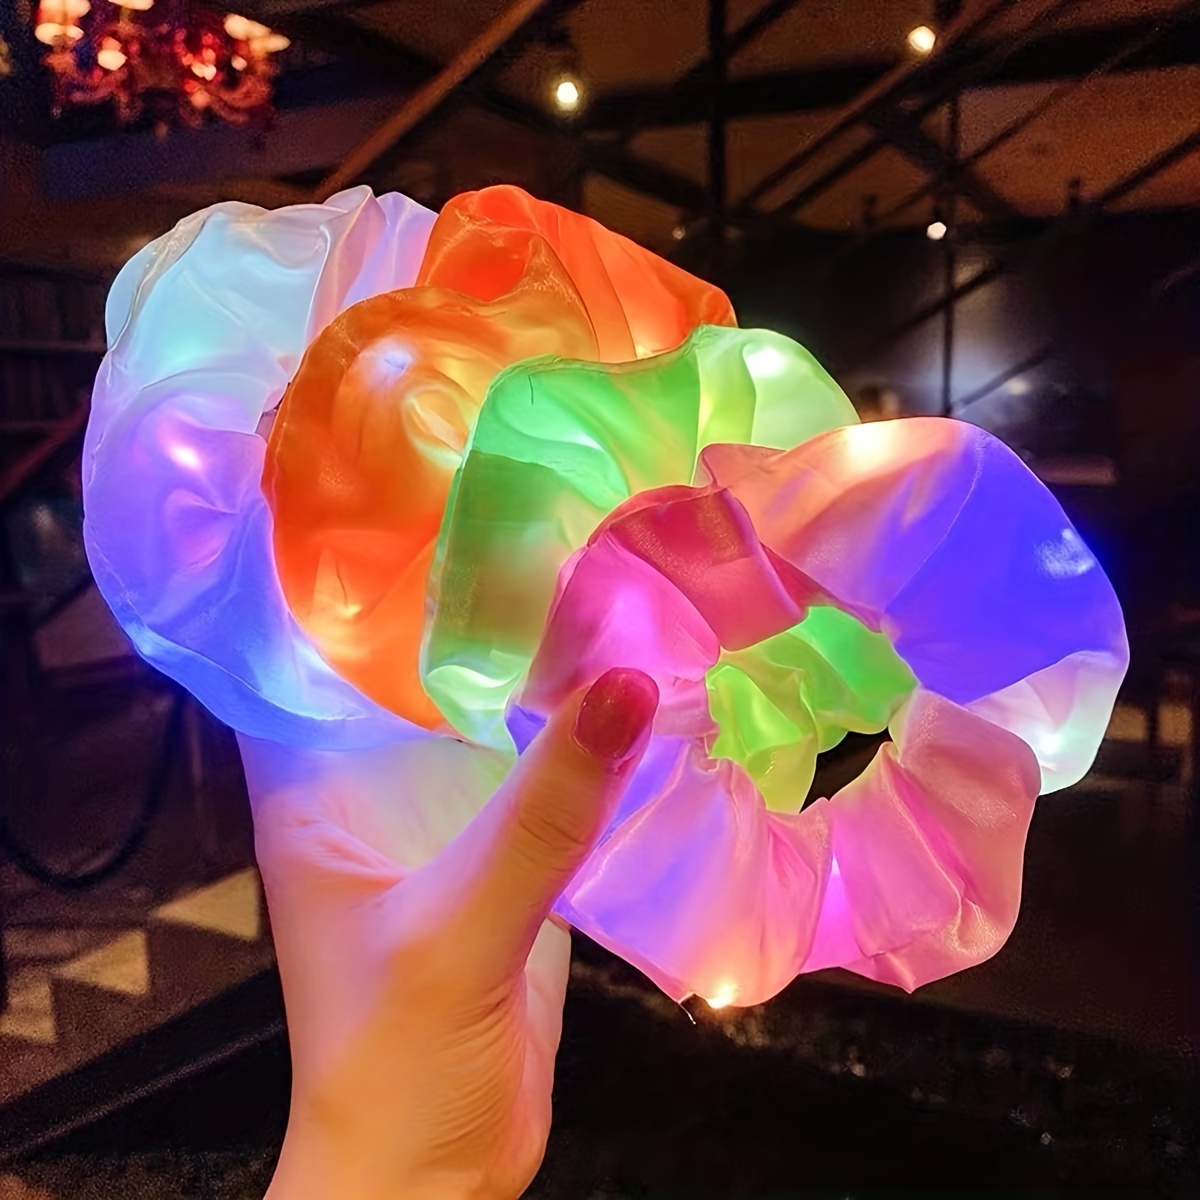 

4pcs Led Light Up Scrunchies Colorful Hair Tie Satin Hair Rope Elastic Ponytail Holder Hair Ties Hair Accessories For Women Girls Halloween Party